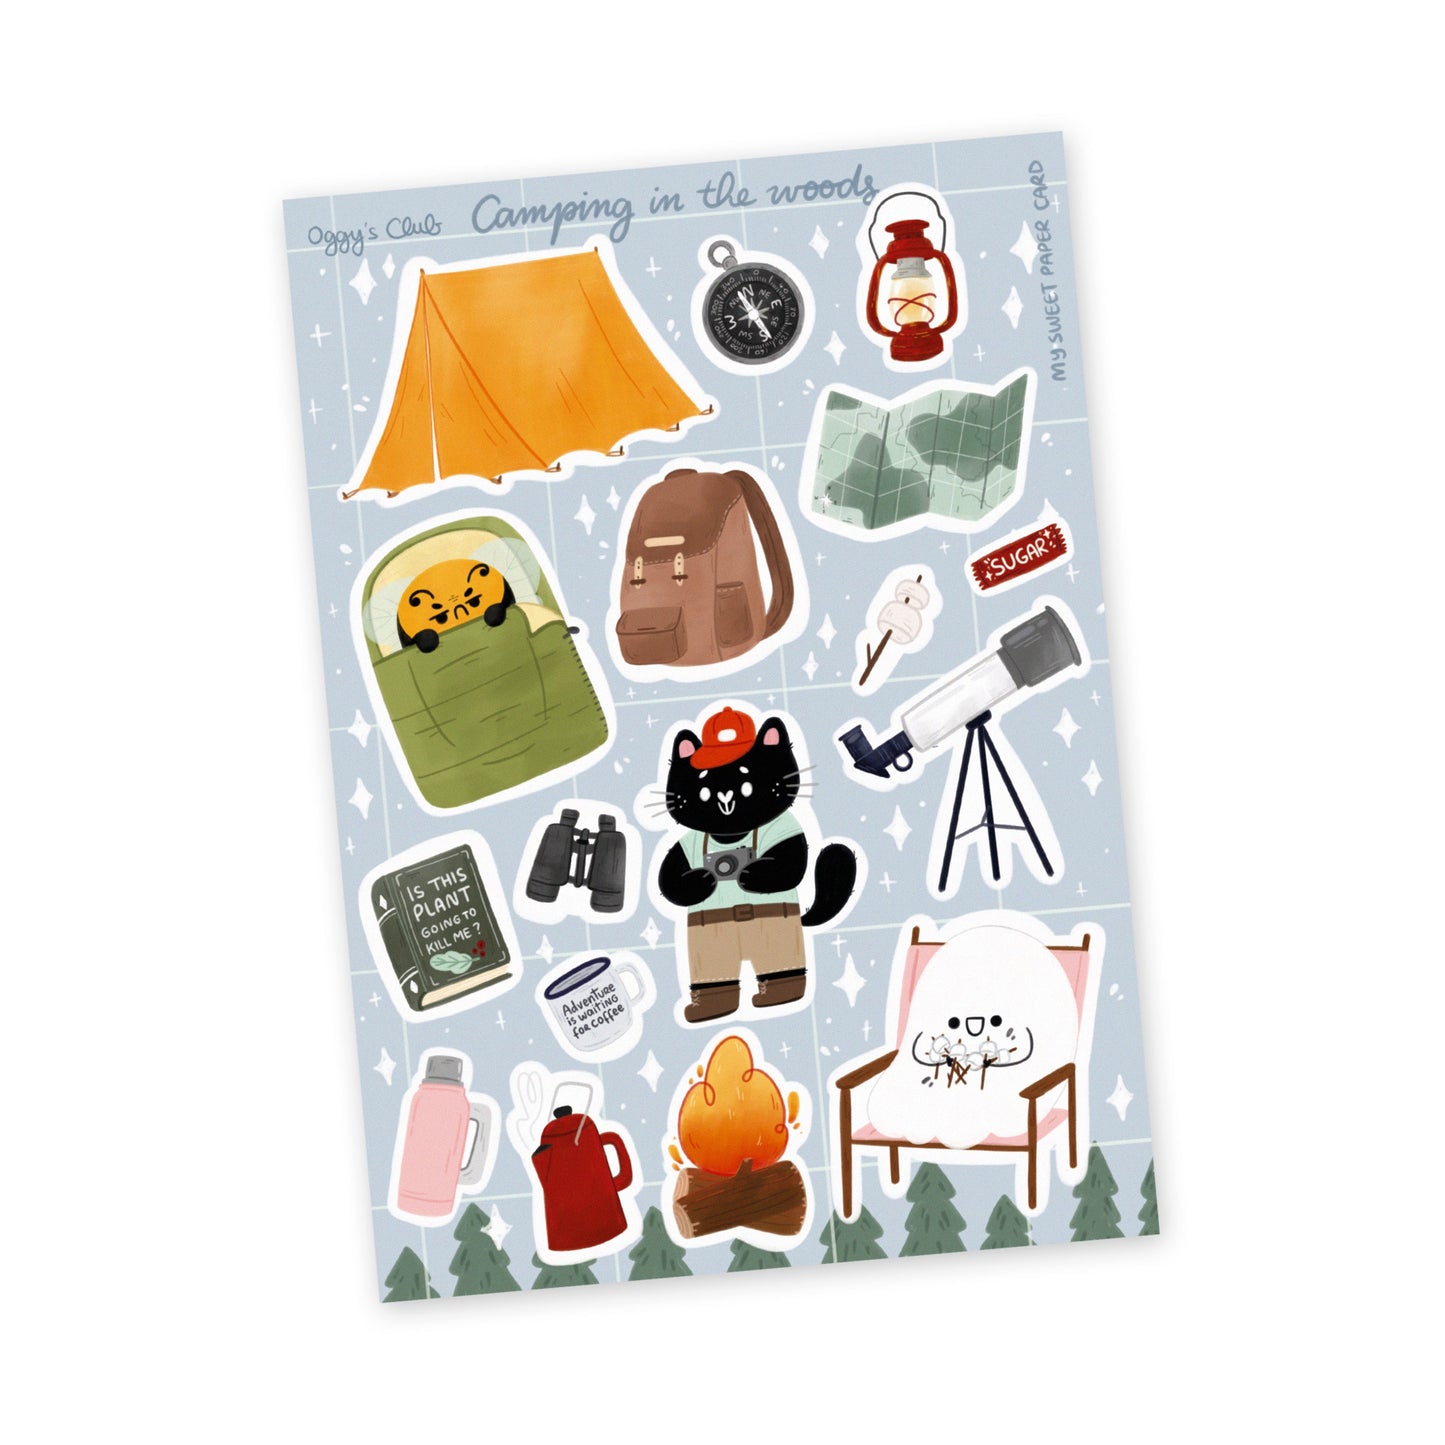 2ND SALE - Oggy's Club - Camping Trip - Stickers Sheet